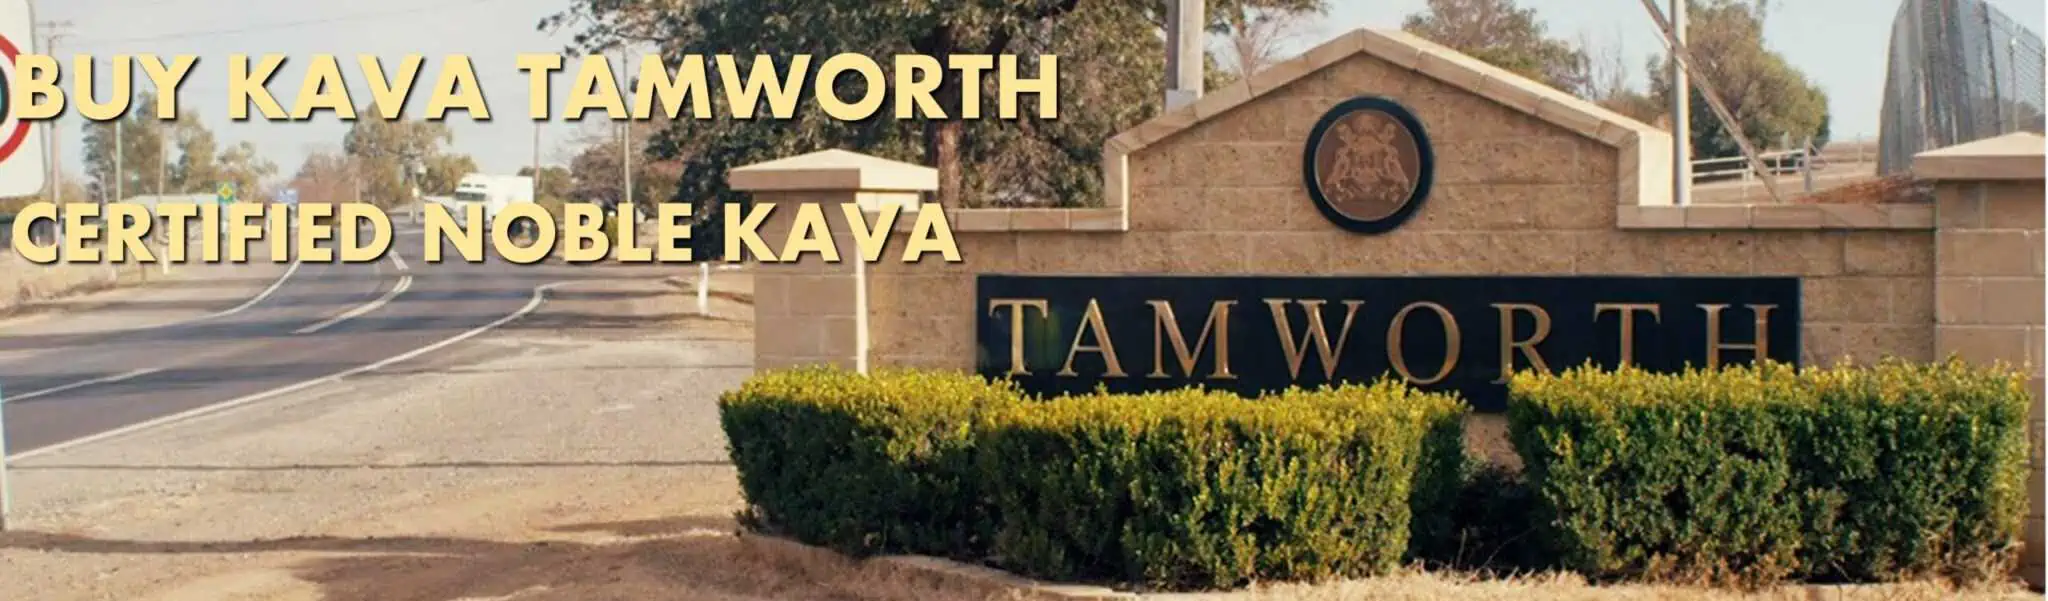 Tamworth township entrance sign with caption Buy Kava Tamworth Certified Noble Kava